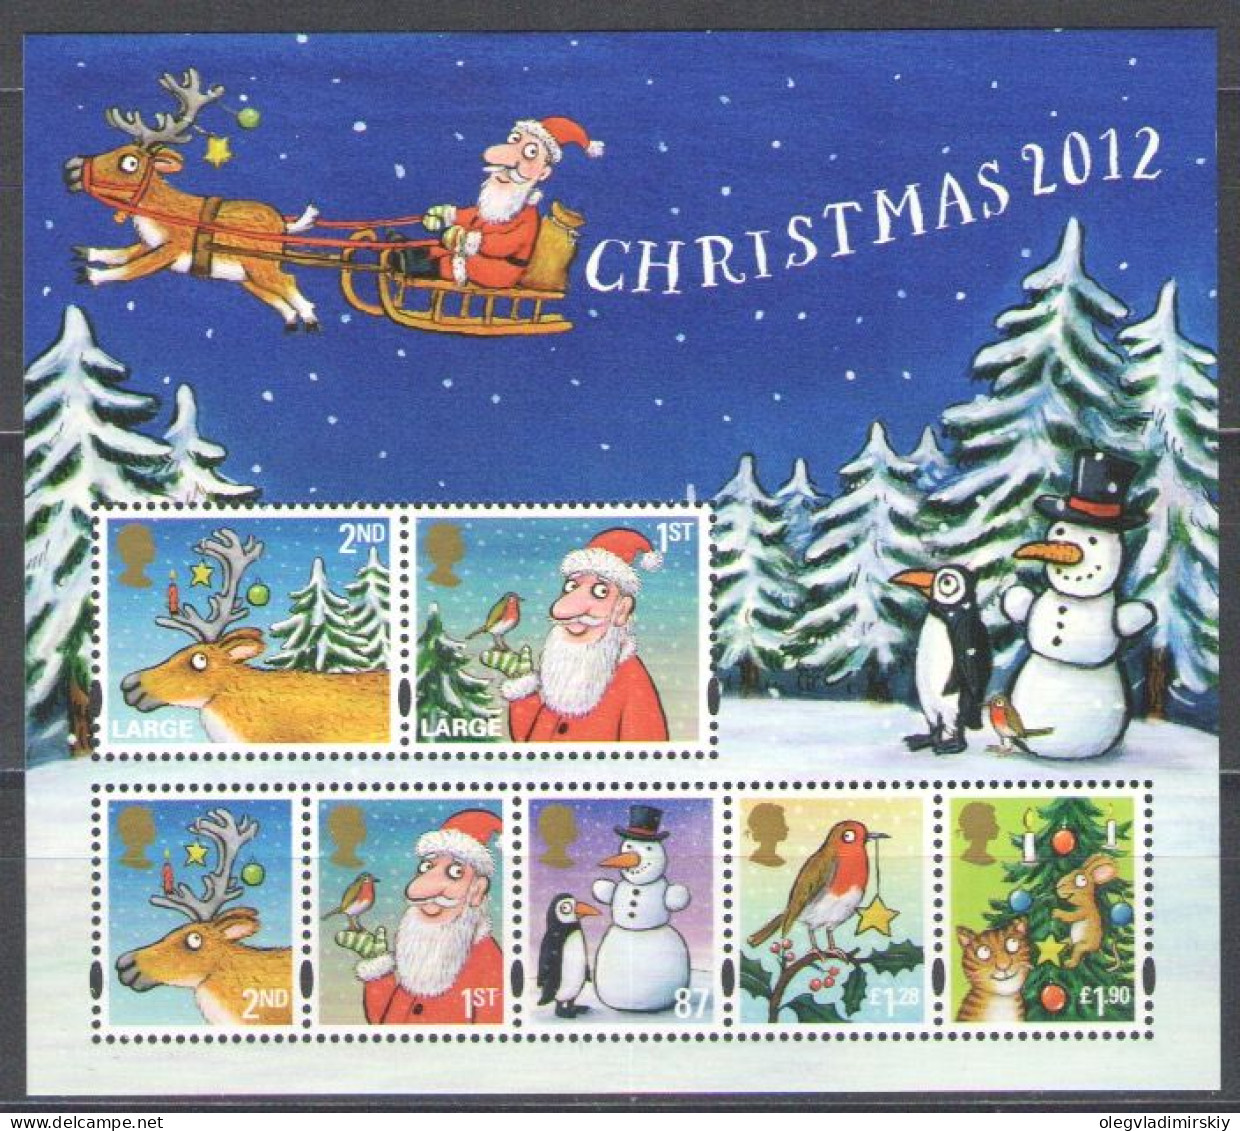 Great Britain United Kingdom 2012 Christmas Set Of 7 Classic Stamps In Block MNH - Weihnachten